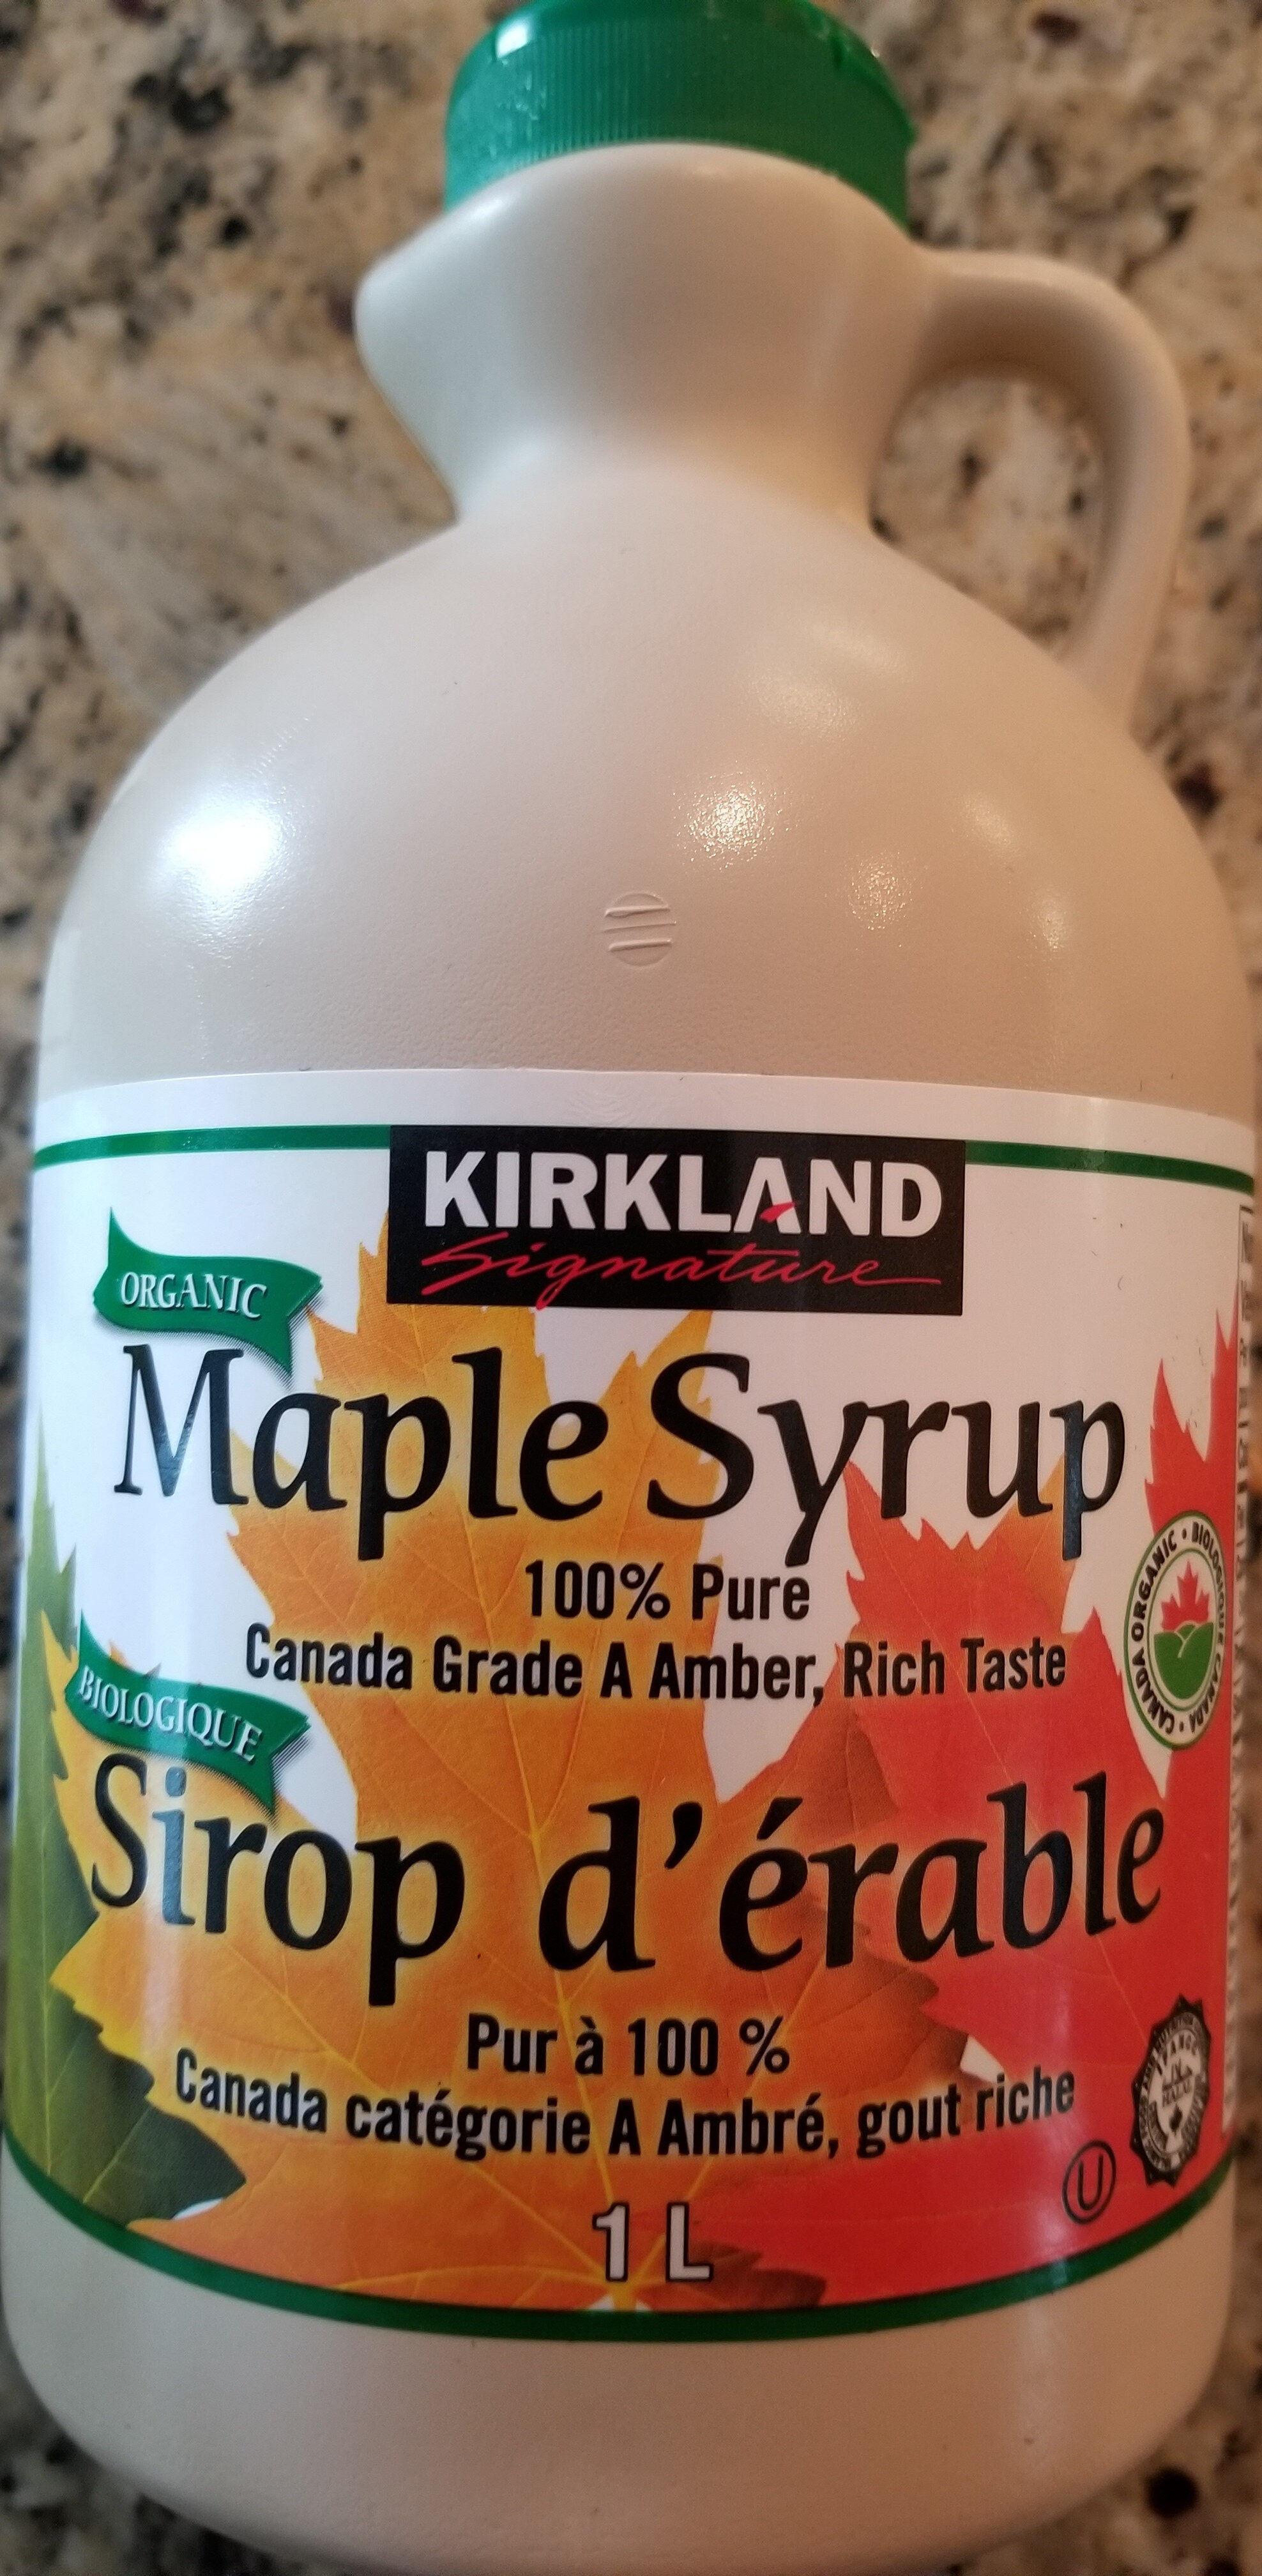 Organic Maple Syrup Grade A Amber - Product - en